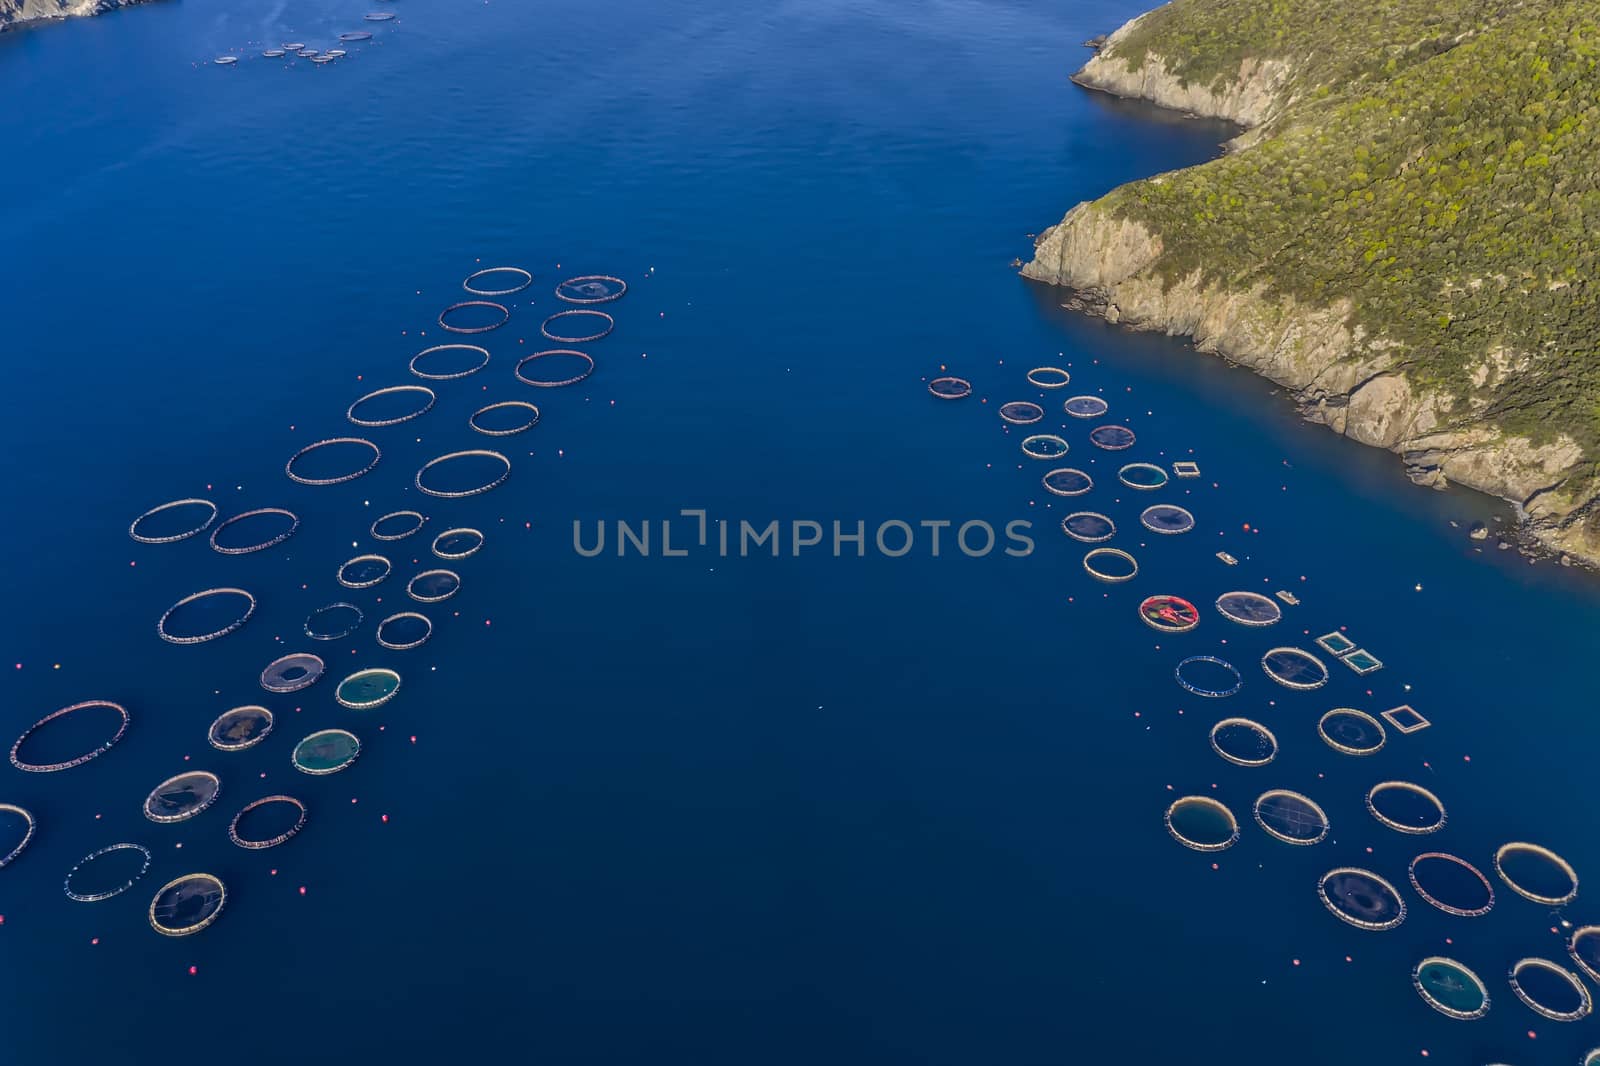 Fish farm with floating cages in Chalkidiki, Greece. Aerial view